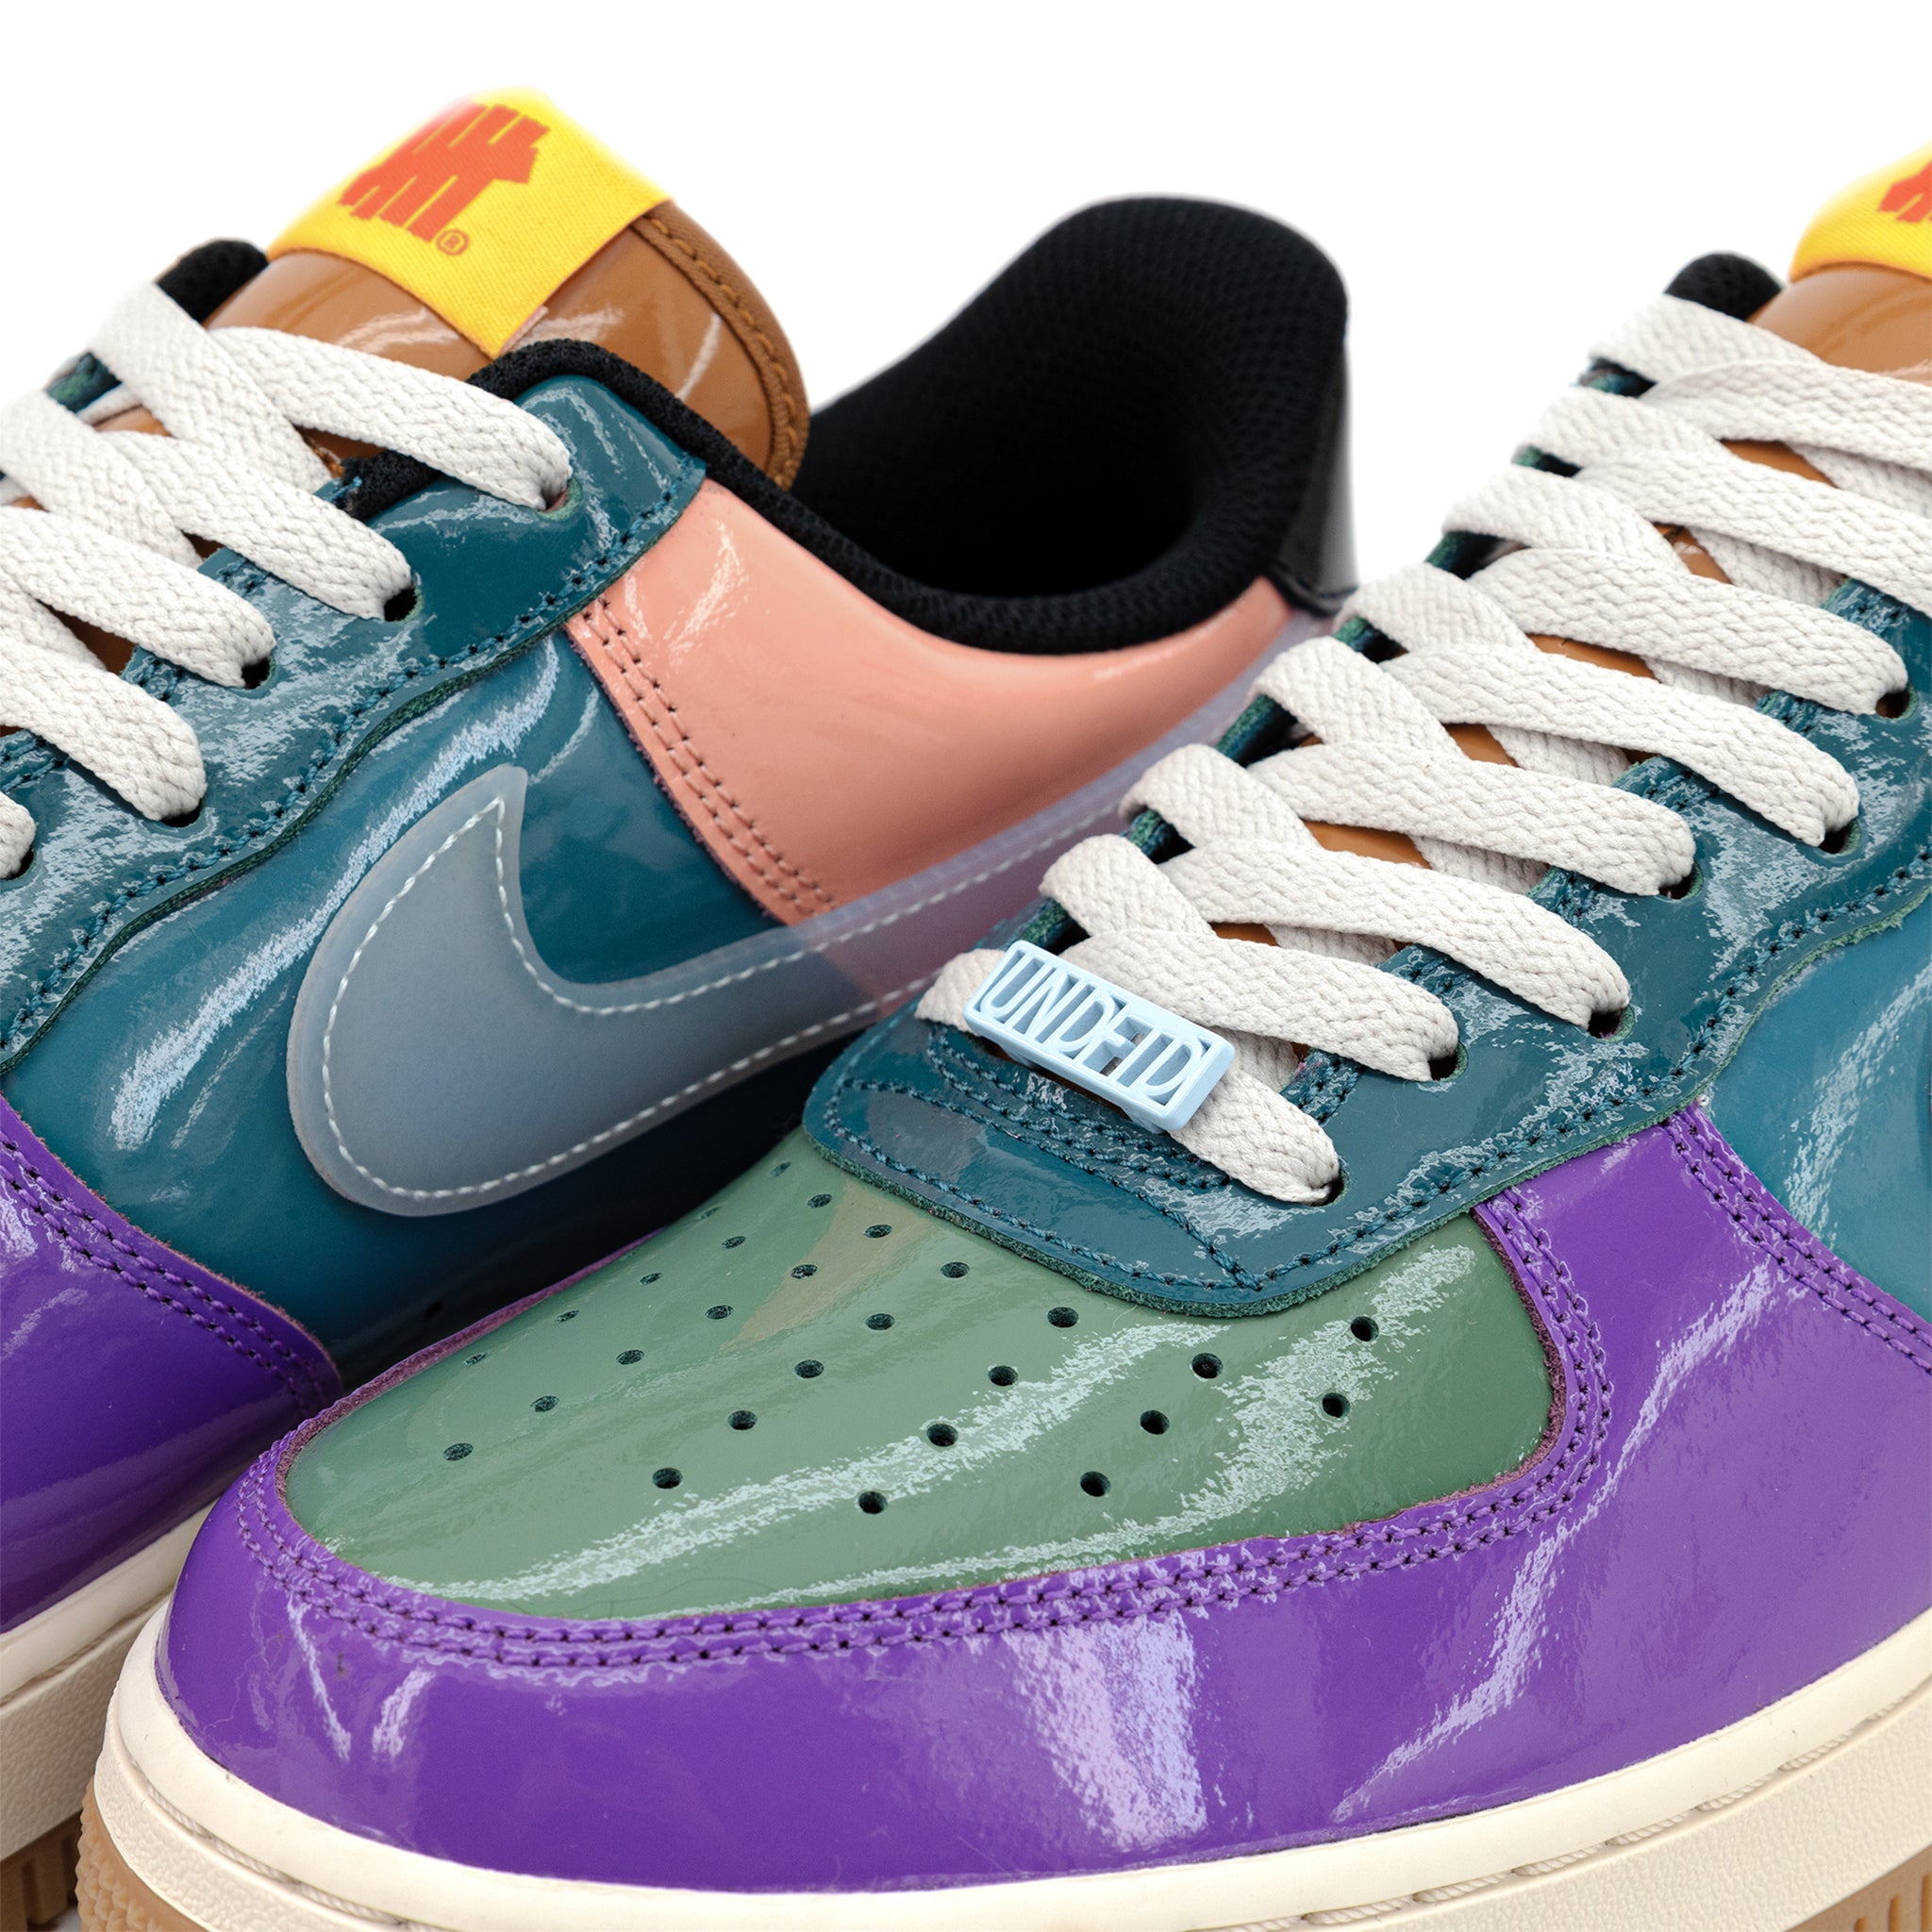 Undefeated x Nike Air Force 1 Low SP (Wild Berry